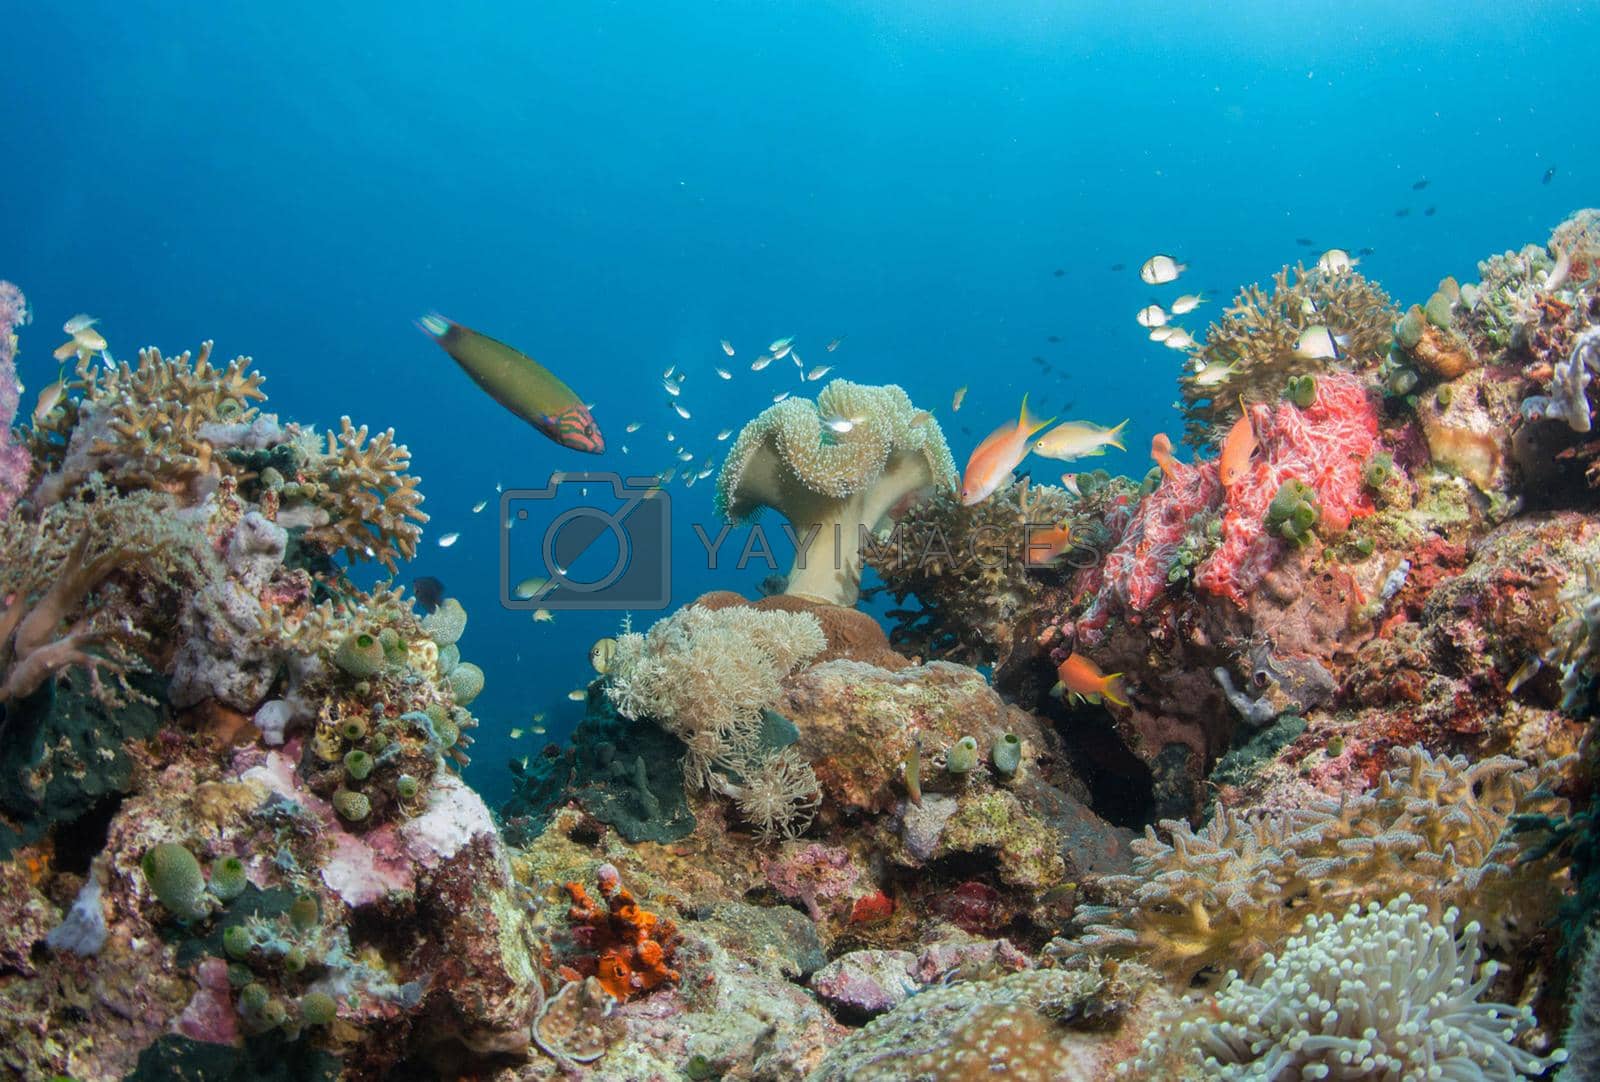 Royalty free image of Indonesia underwater pictures by TravelSync27